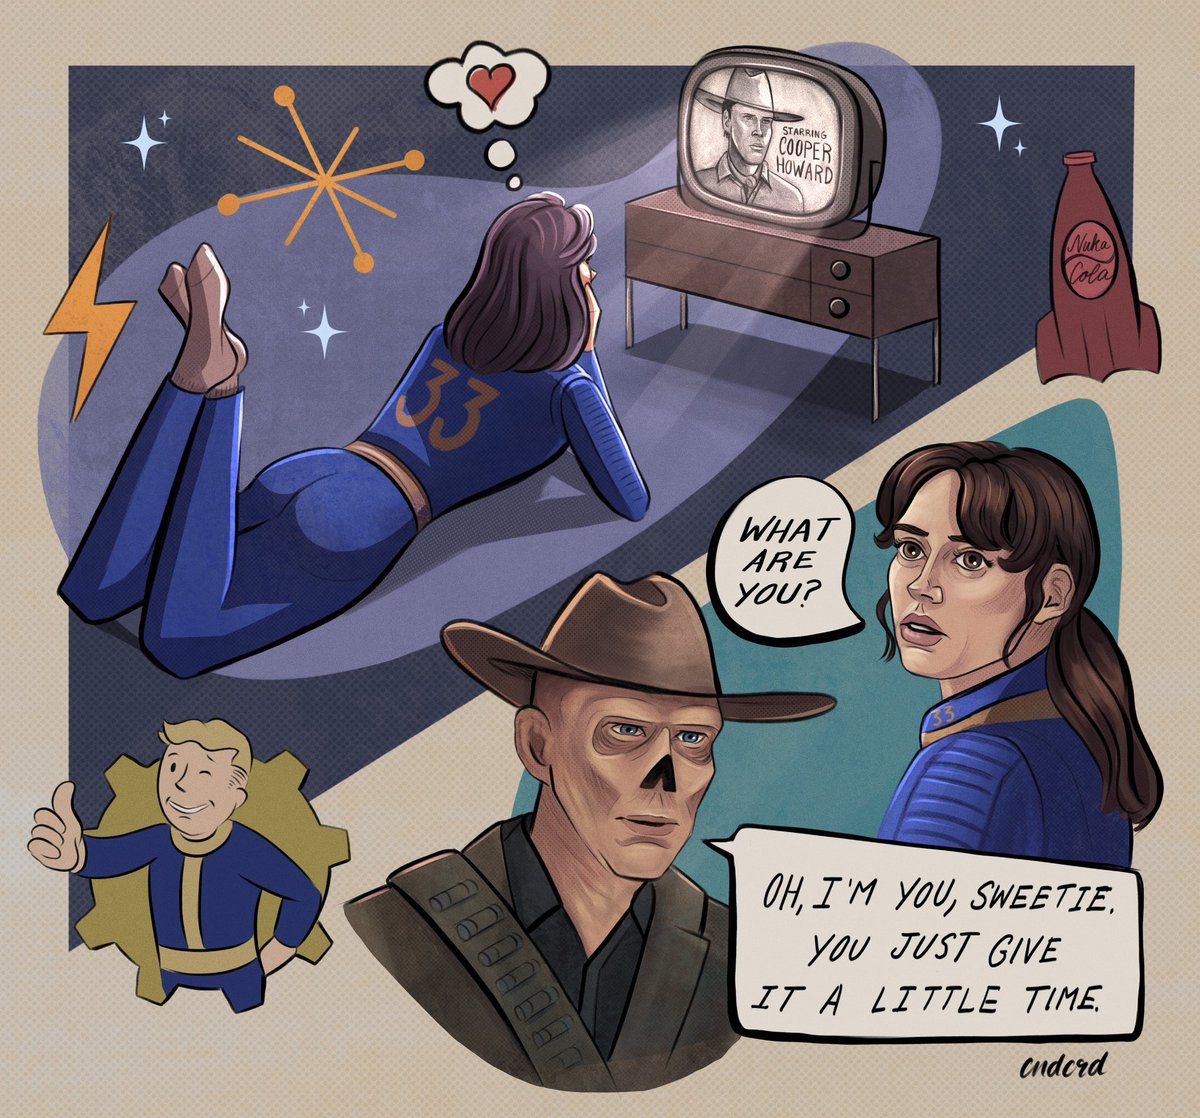 “Oh, I’m you, sweetie. You just give it a little time.” #FalloutOnPrime #fallout #lucymaclean #theghoul #cooperhoward #ghoulcy